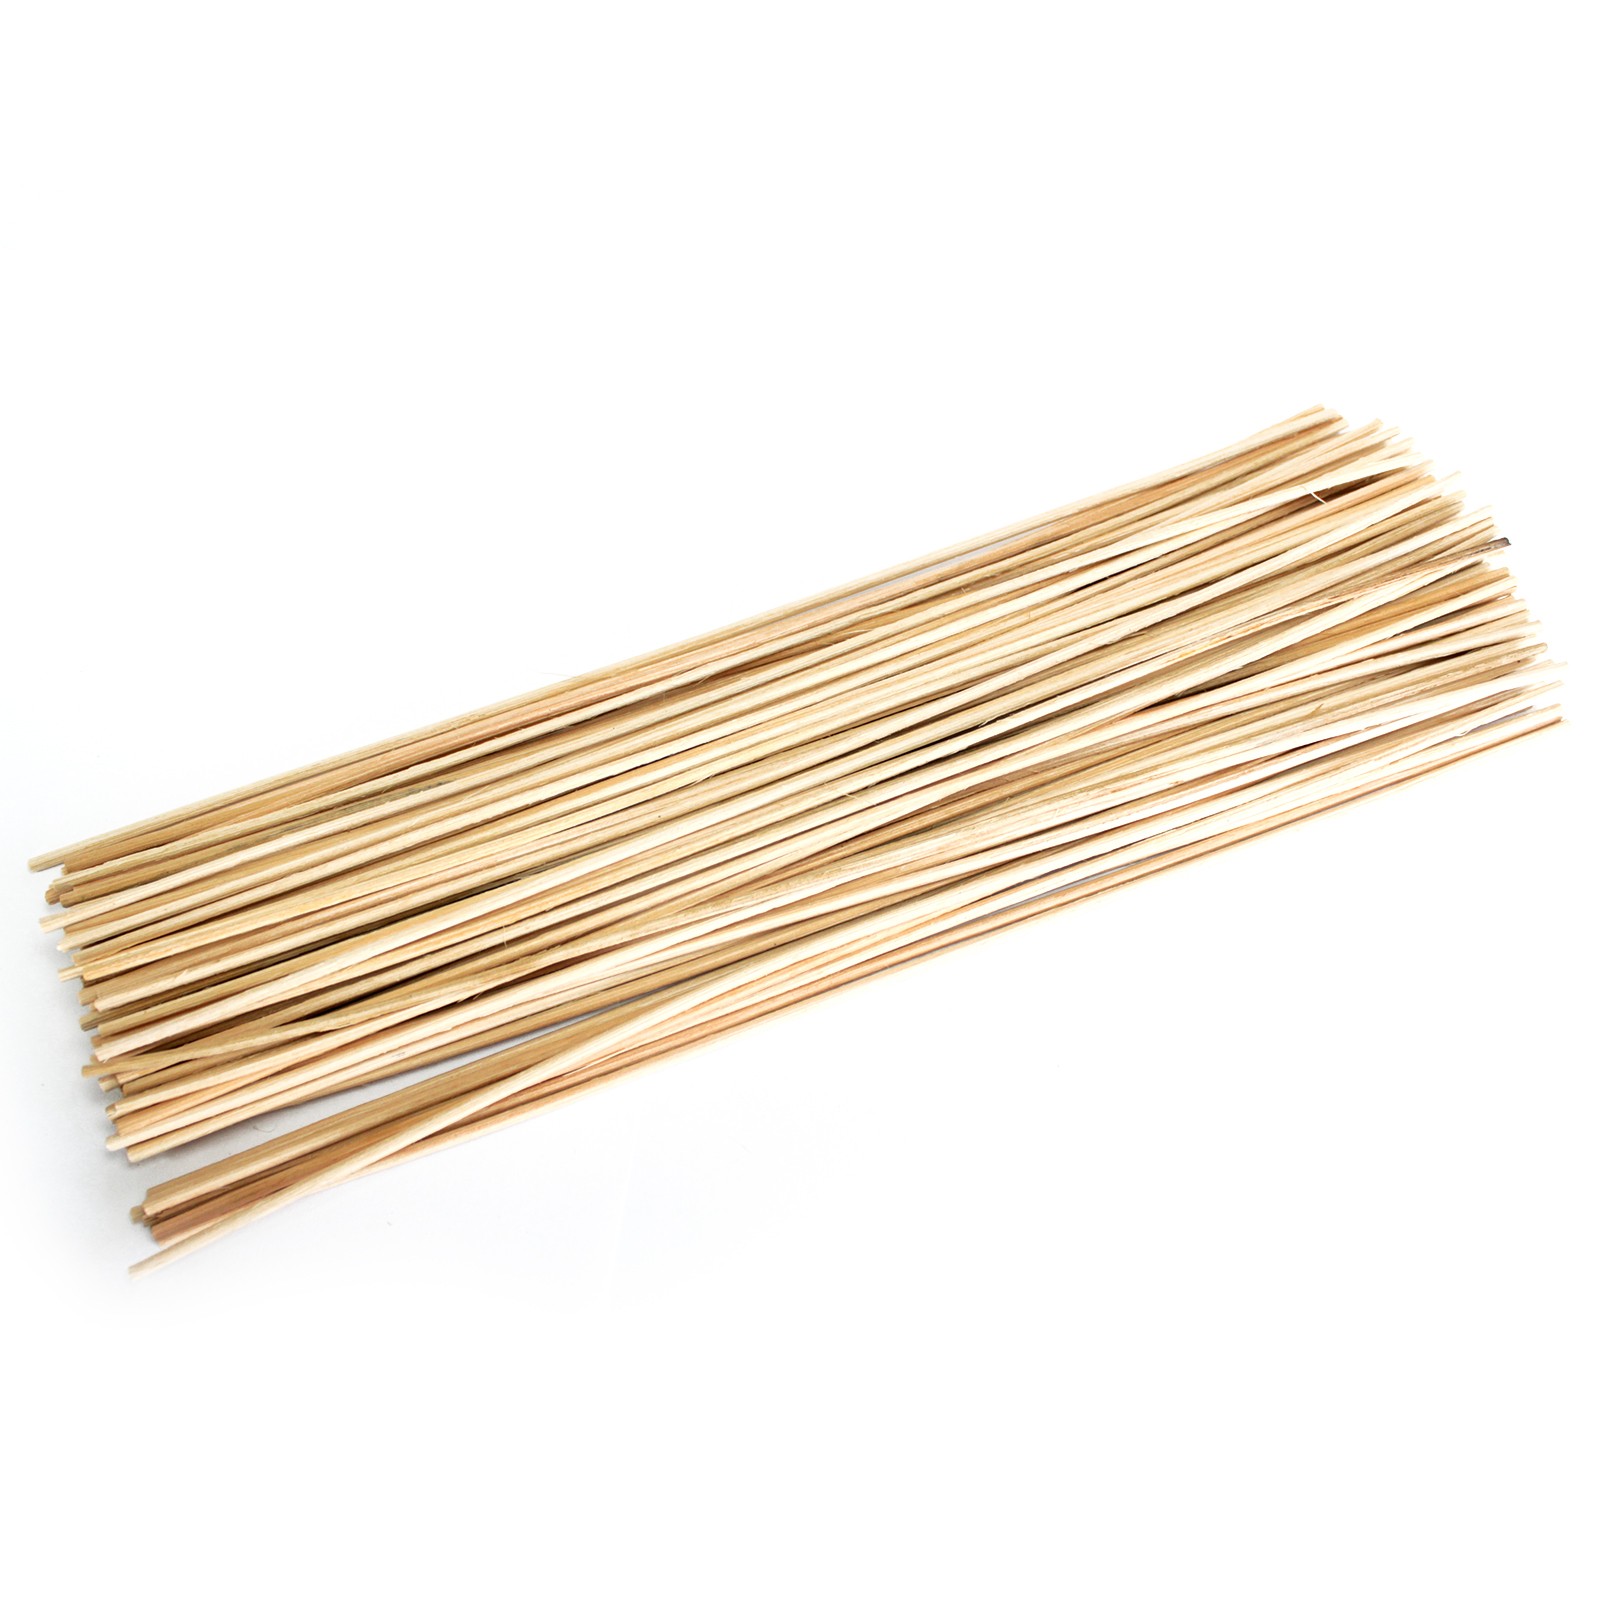 12 Pack of Replacement Reeds 2.5mm 